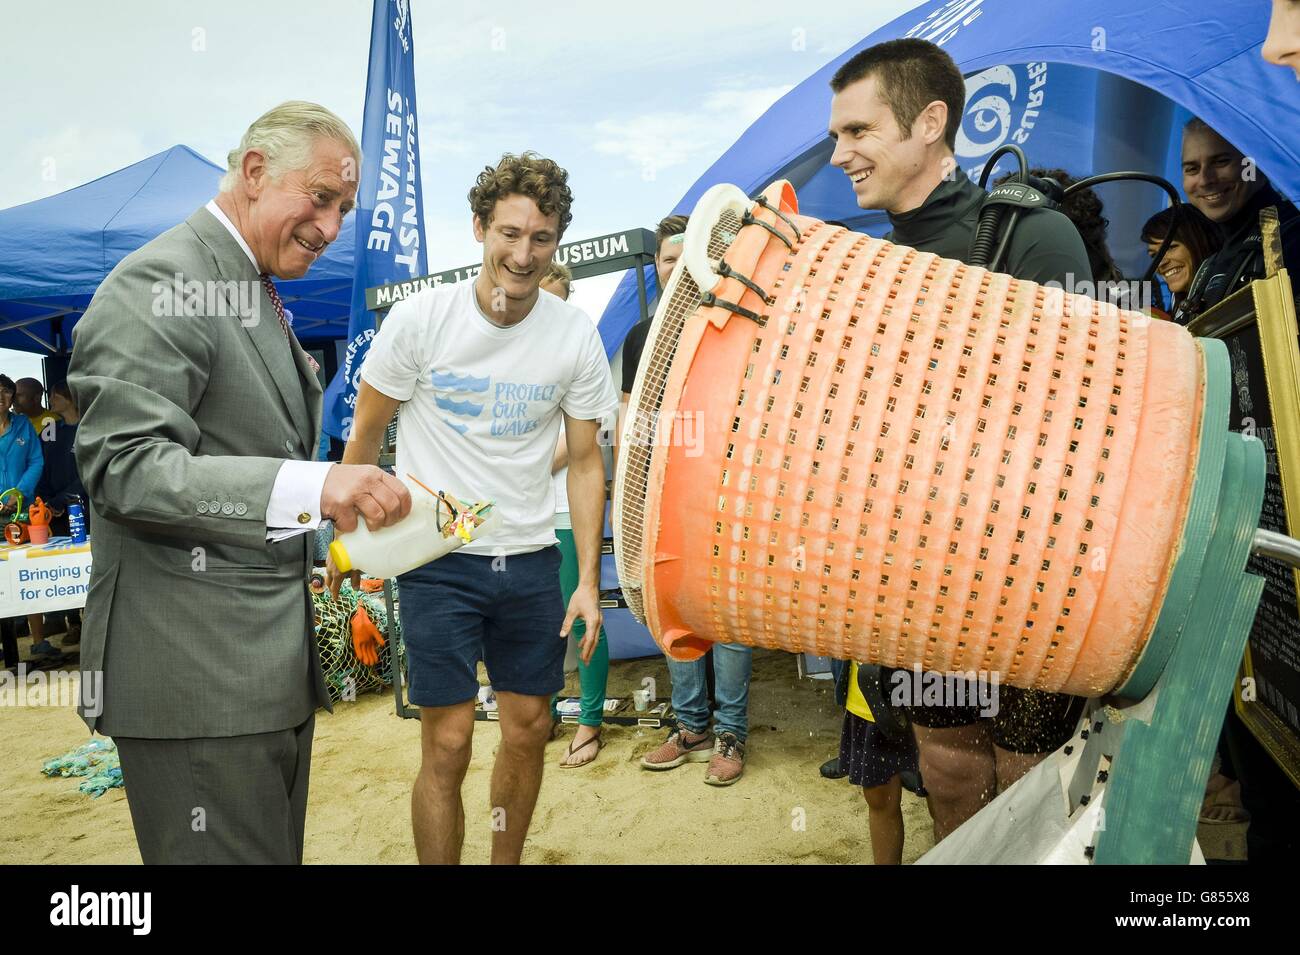 The Prince of Wales uses a recycled plastic milk carton to scoop beach litter to demonstrate a hand operated sand sifter, which filters out marine debris collected from beaches, during his visit to Fistral Beach, Newquay, as part of a Royal tour of Cornwall. Stock Photo